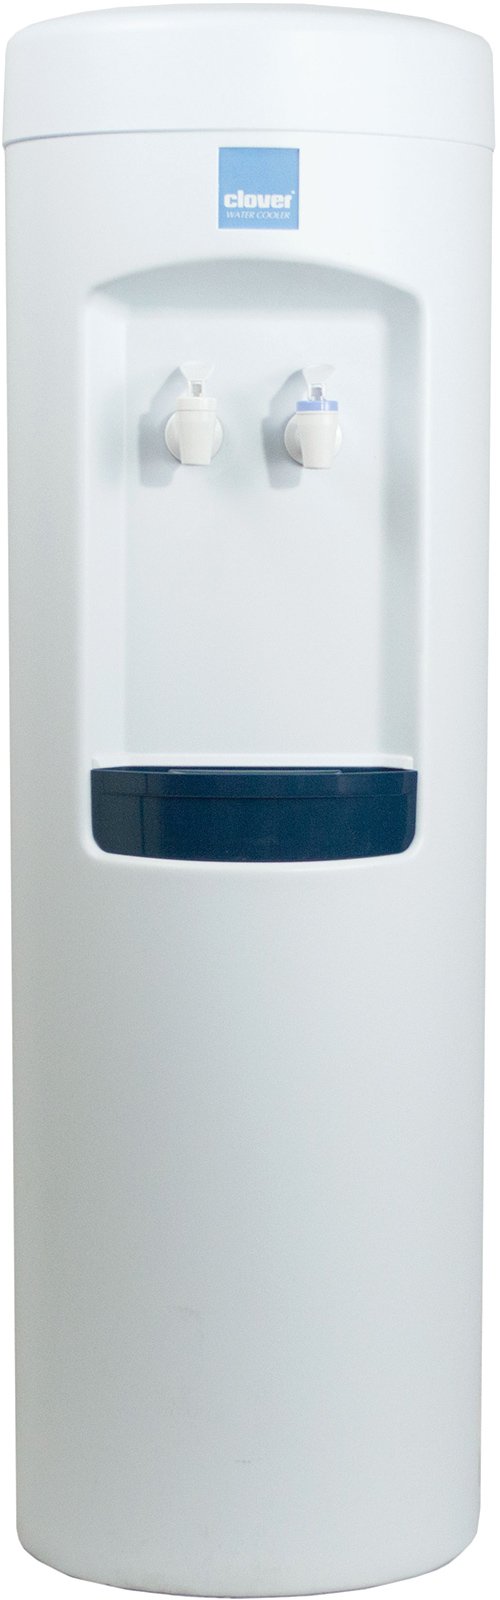 Clover B7B Room Temp and Cold Bottleless Water Dispenser with Conversion Kit, Install Kit, Filter, White